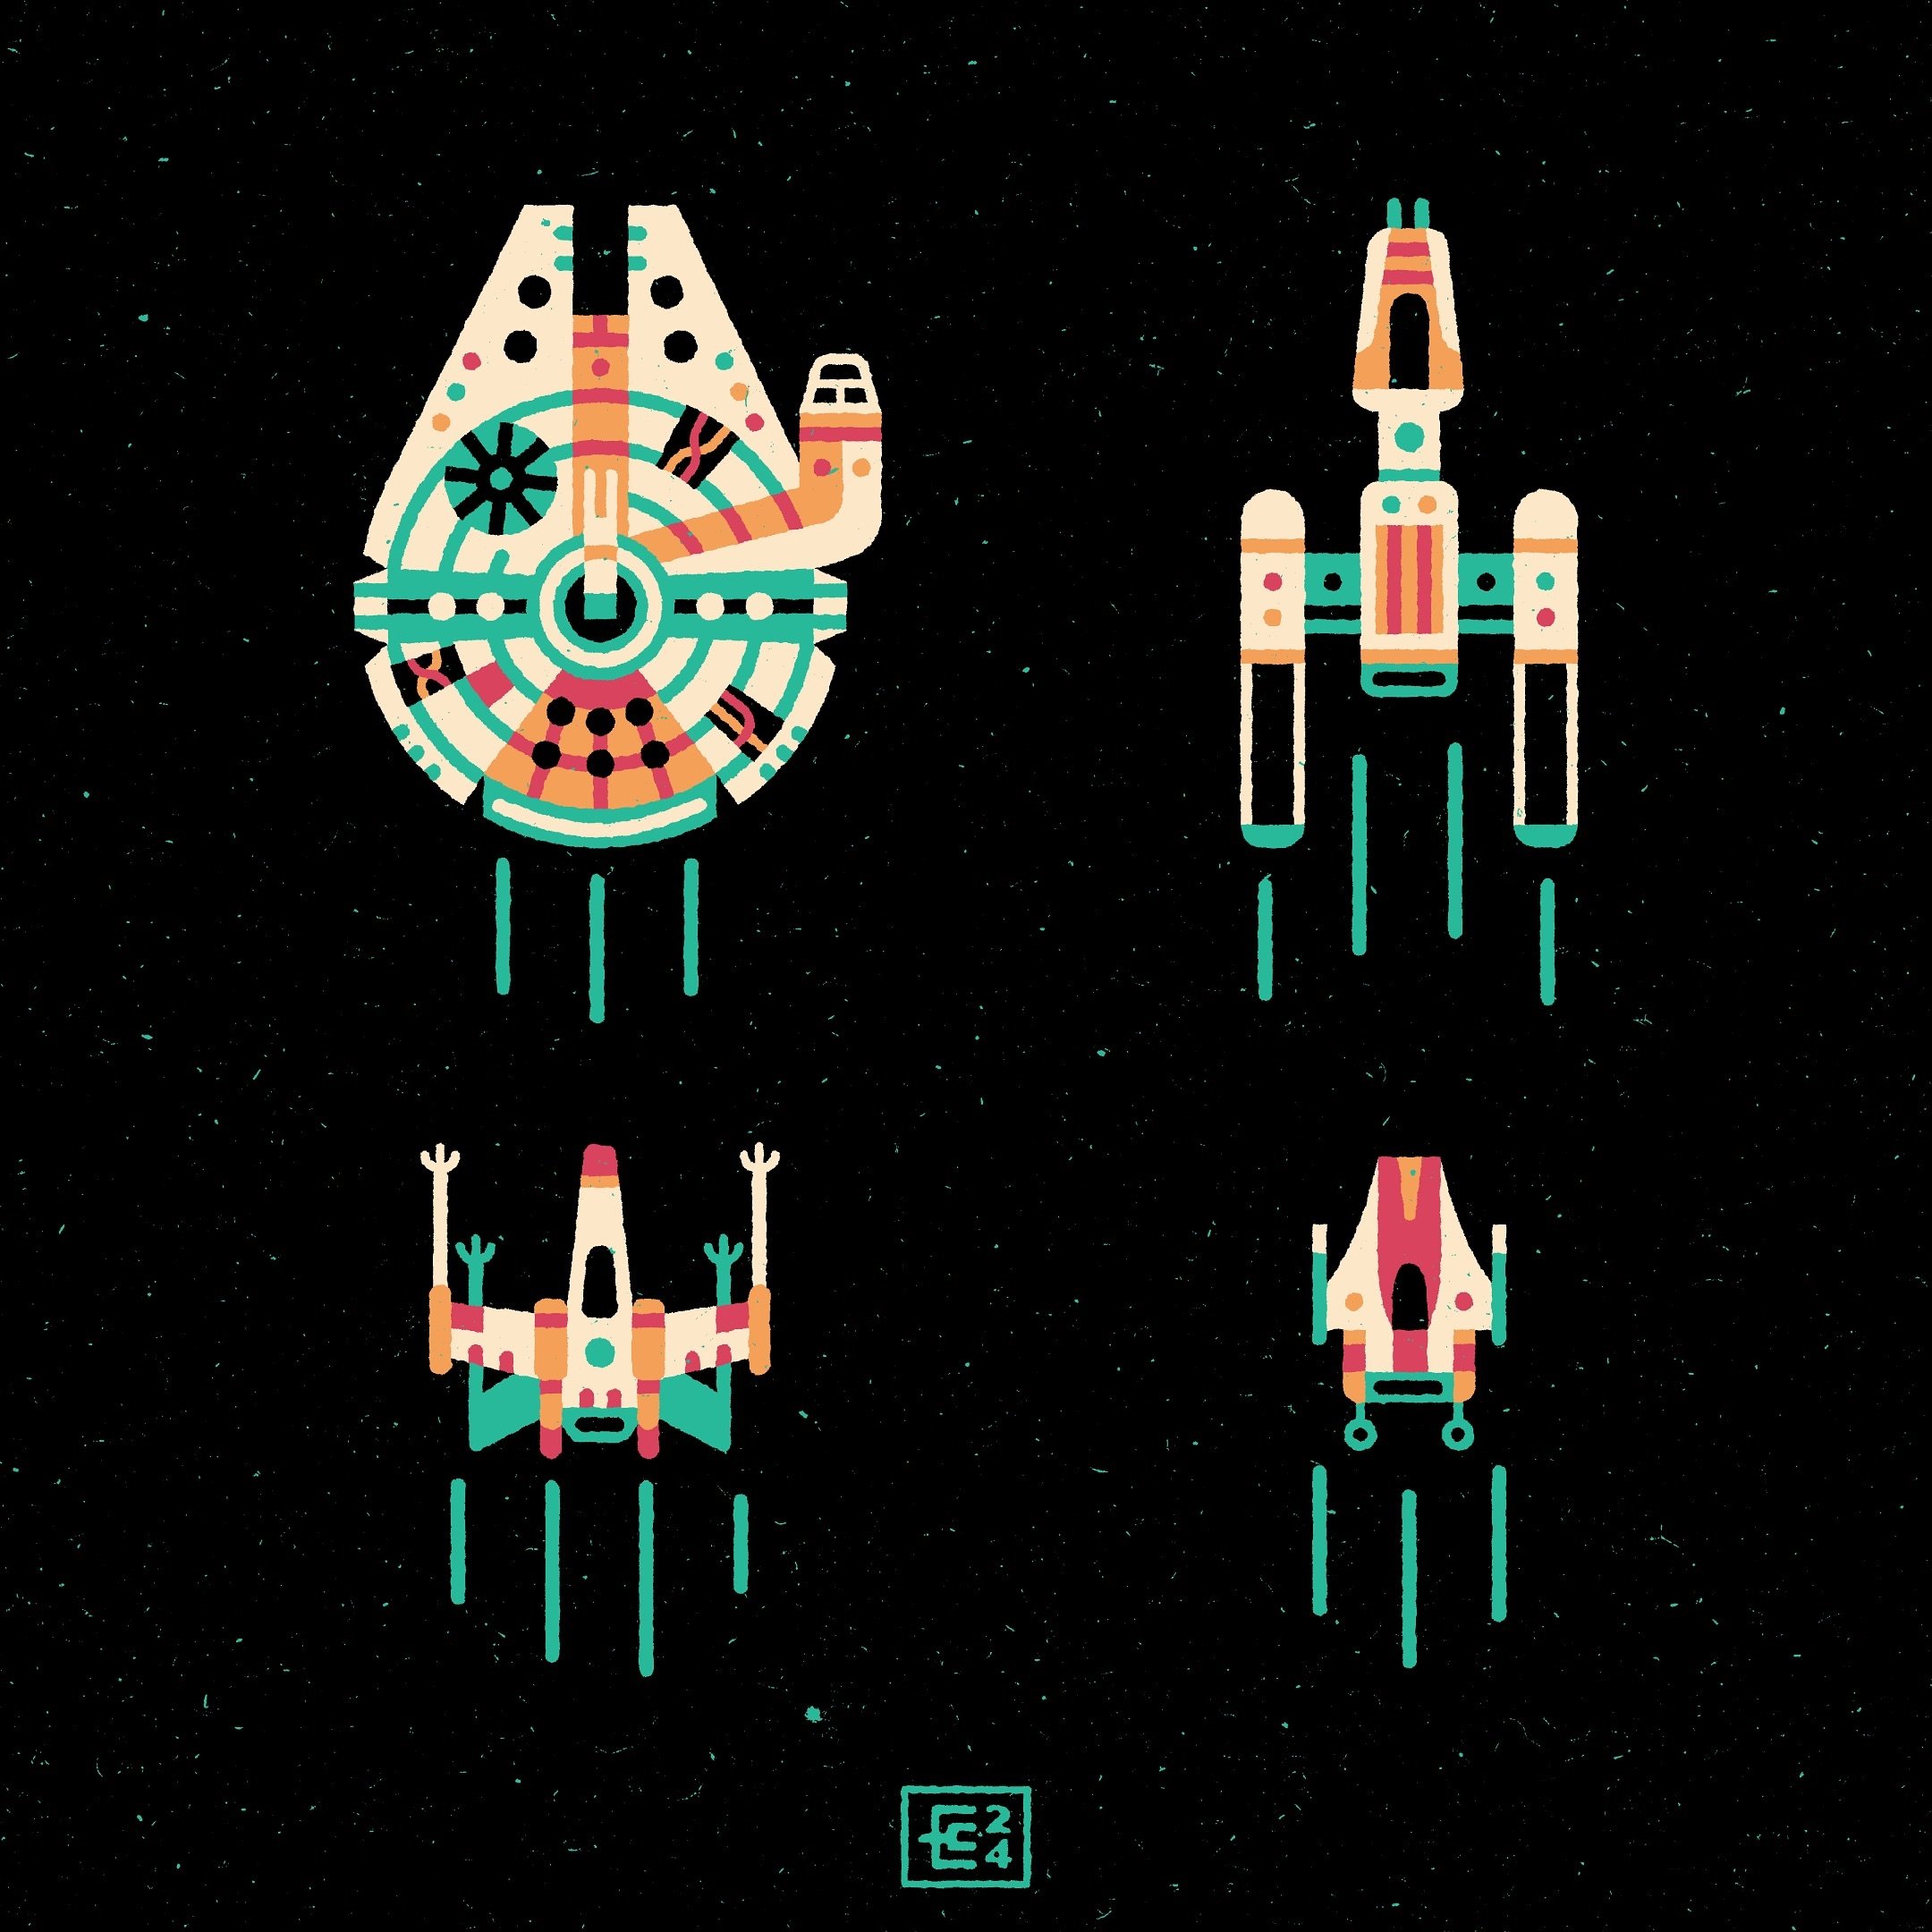 A &amp; X &amp; Y wings + a falcon. more little star wars icons for another cool upcoming project
.
.
.
#starwars #starwarsart #starwarsartwork #illustrator #vectorillustration #vectorart #icondesign #millenniumfalcon #xwing